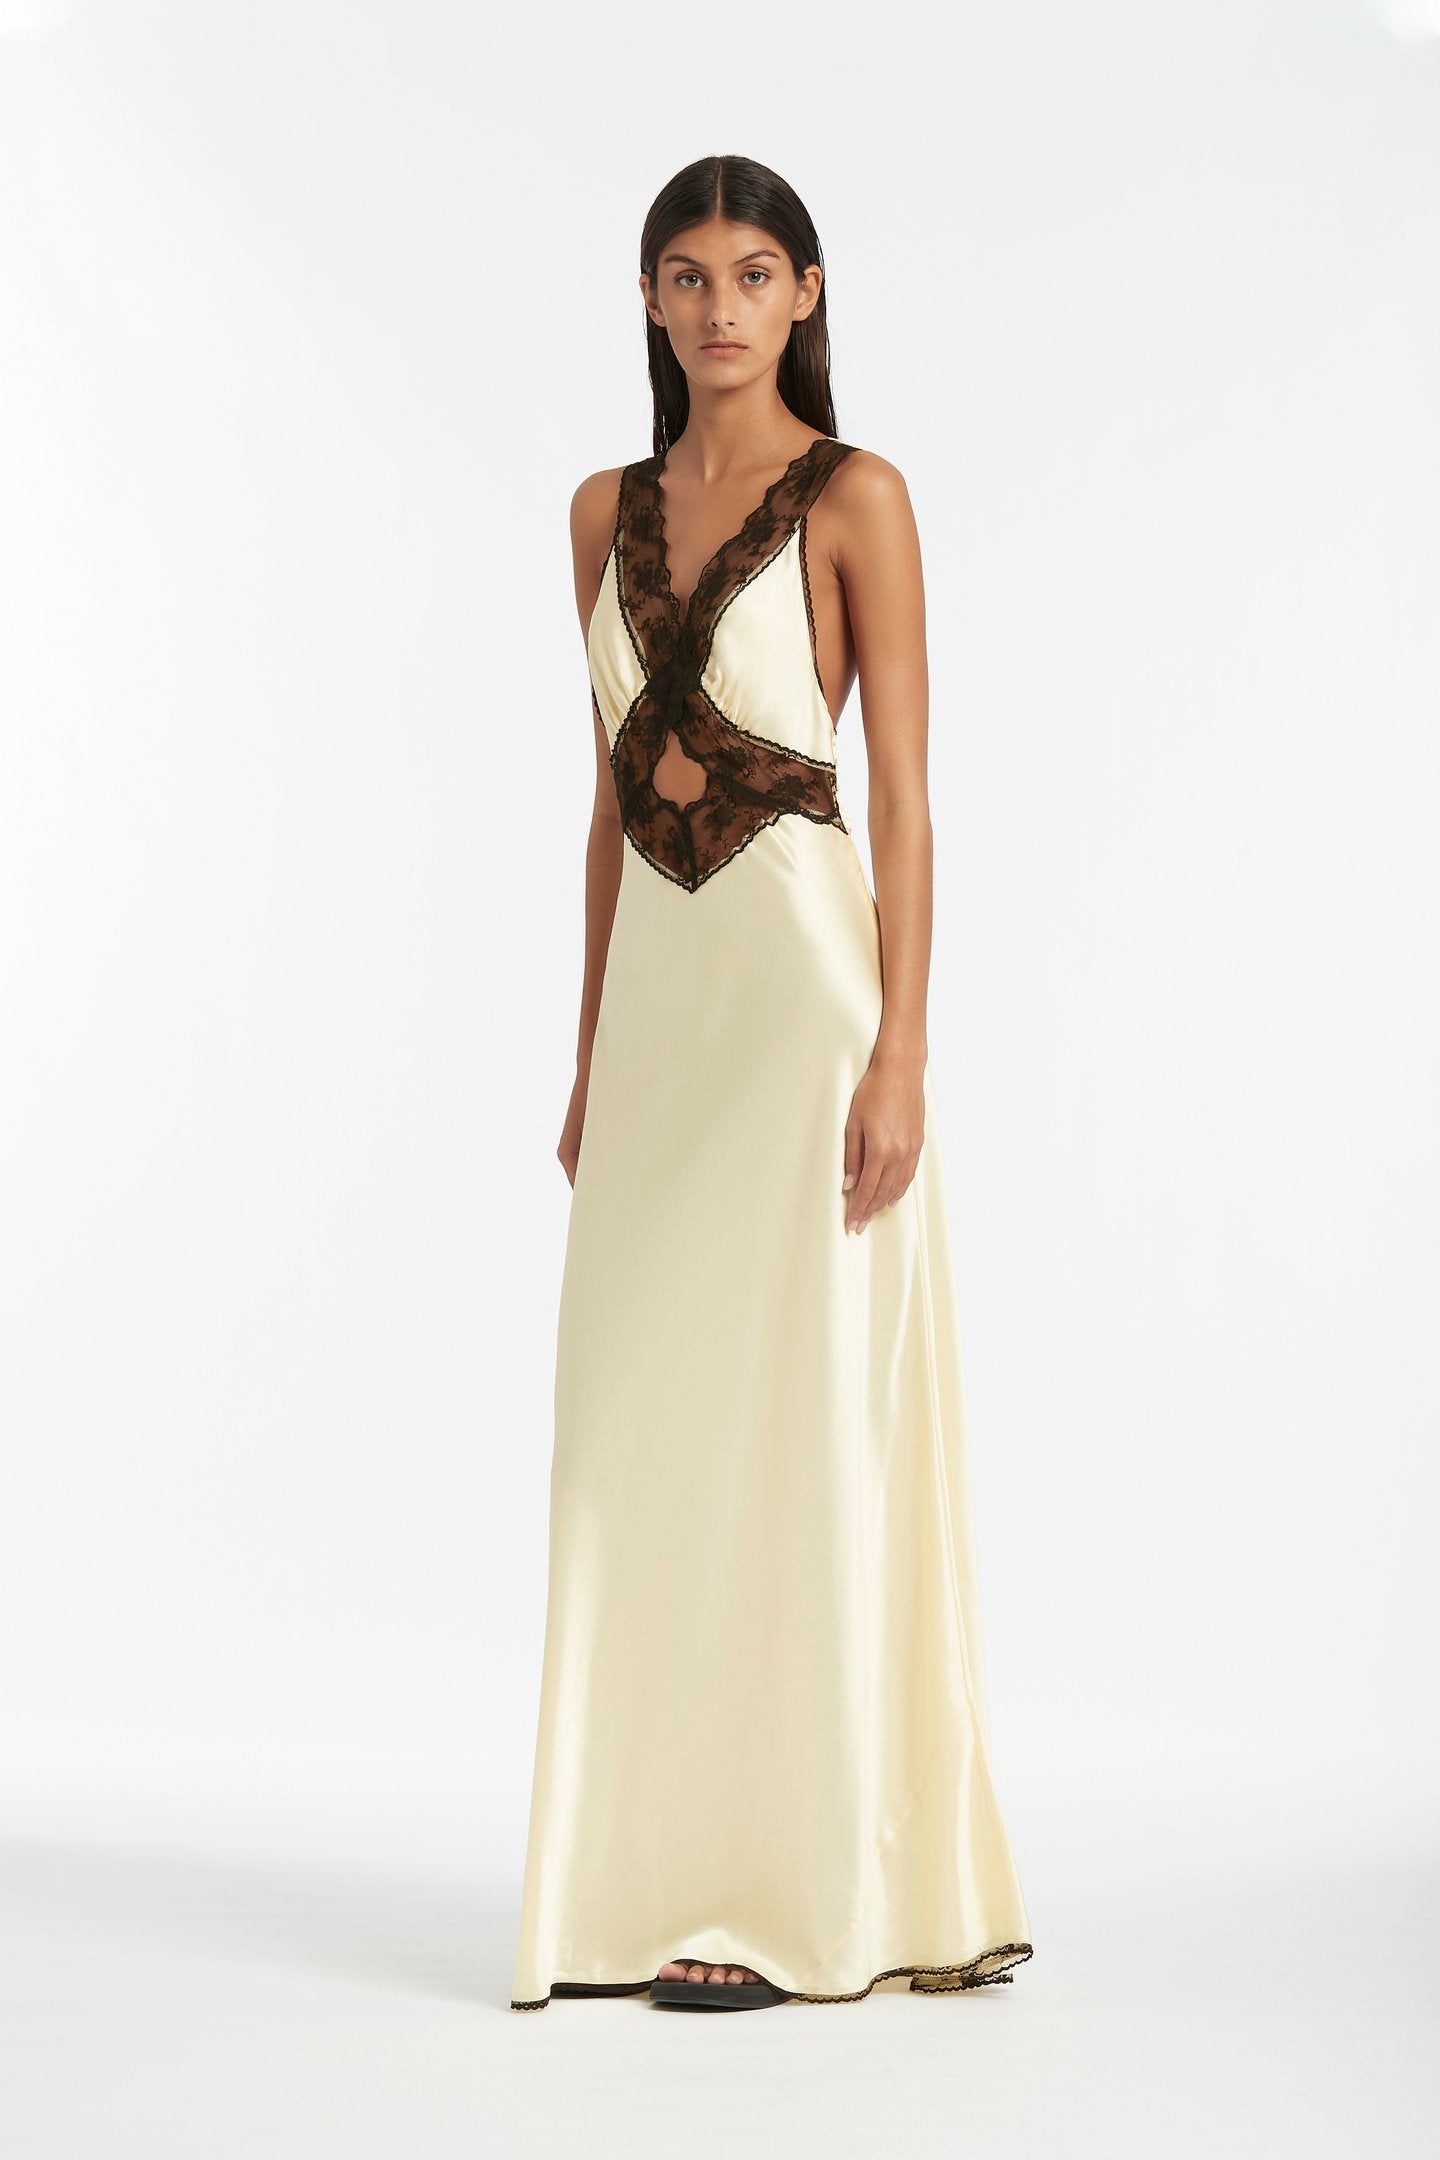 SIR - WILLA CUT OUT GOWN - WHITE Full length angle